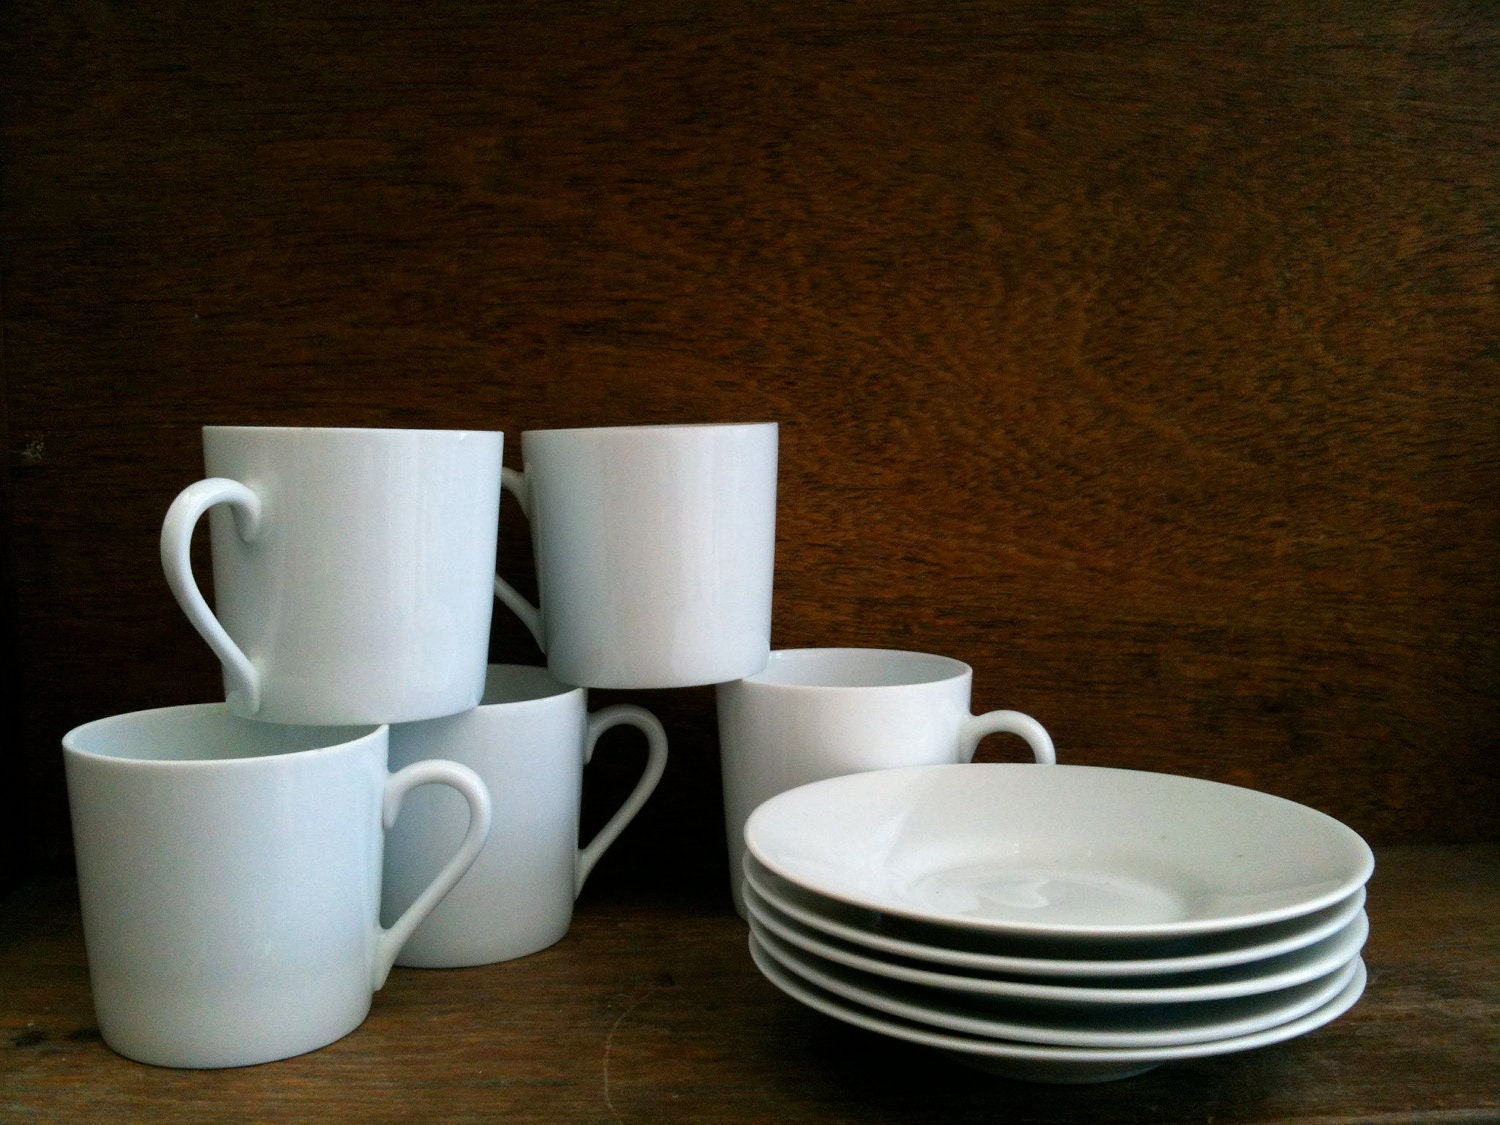 Vintage French Small Limoges White Coffee Cups, Set of 5 - EnglishShop